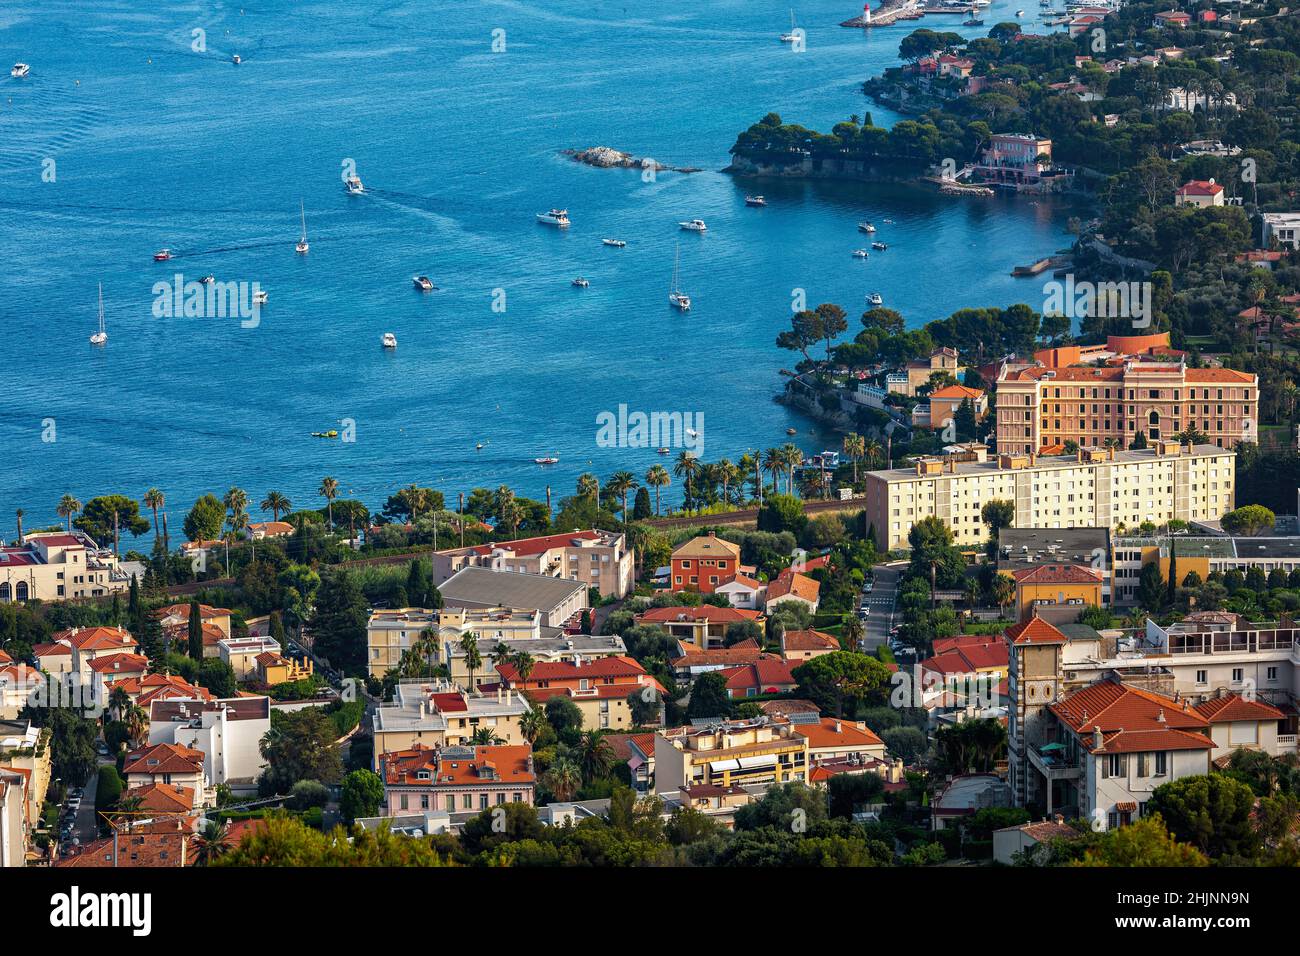 View from above of town on Mediterranean sea coastline on French Riviera. Stock Photo